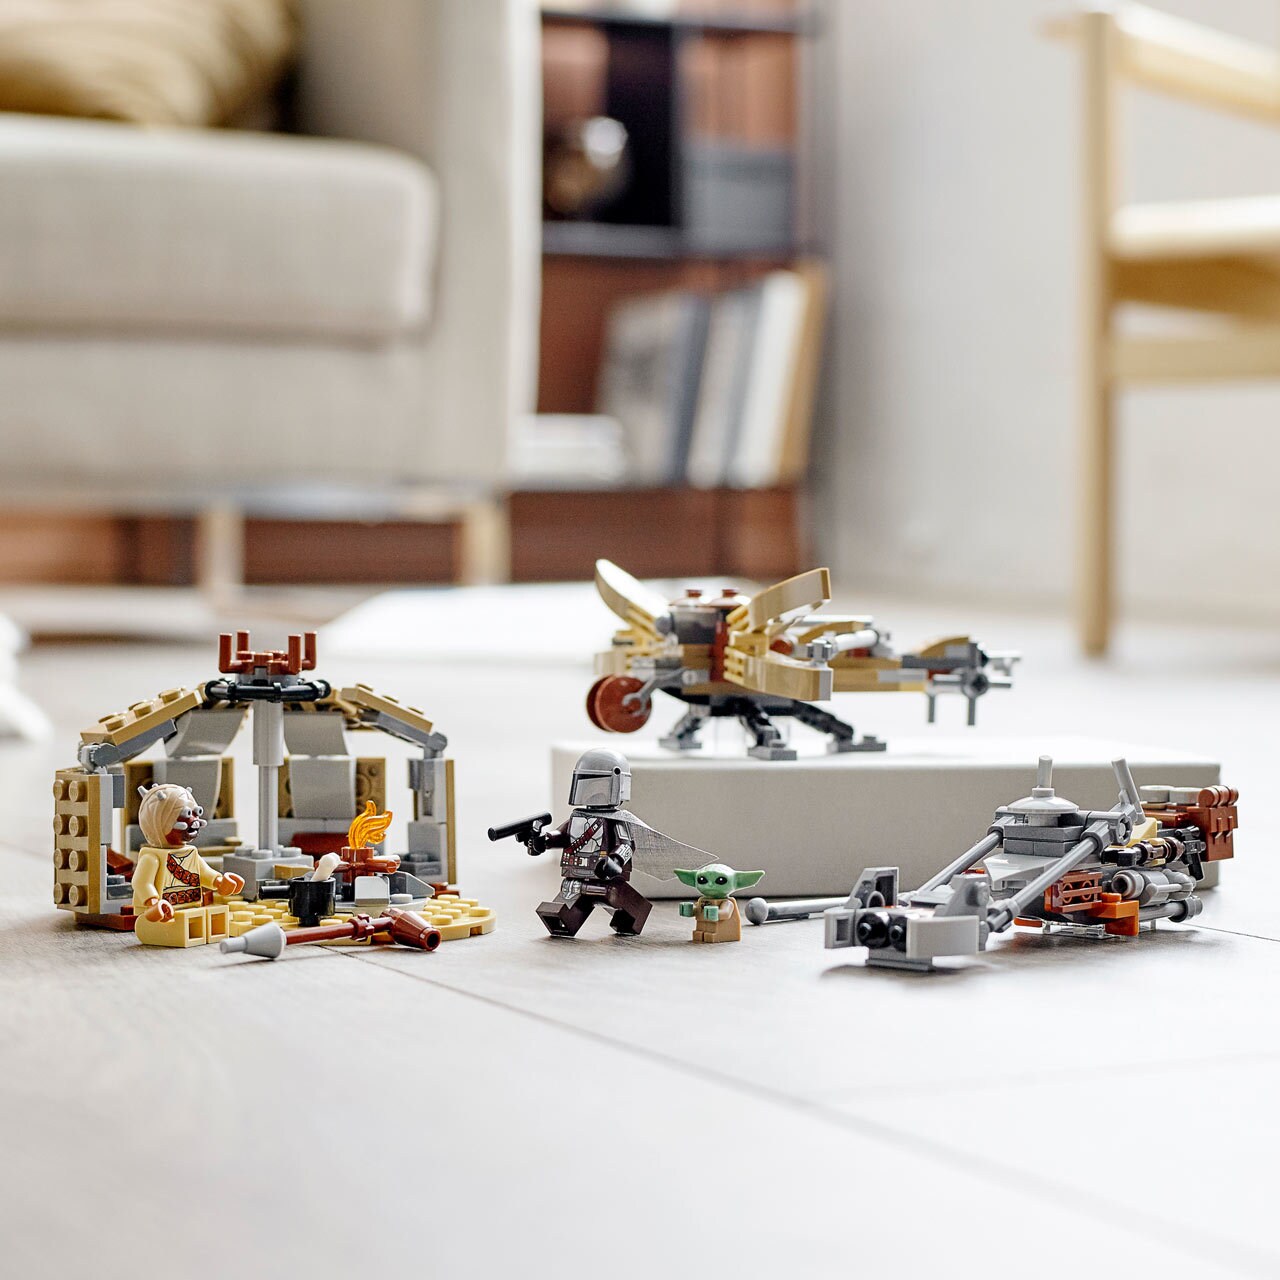 The Trouble on Tatooine Building Set by The LEGO Group